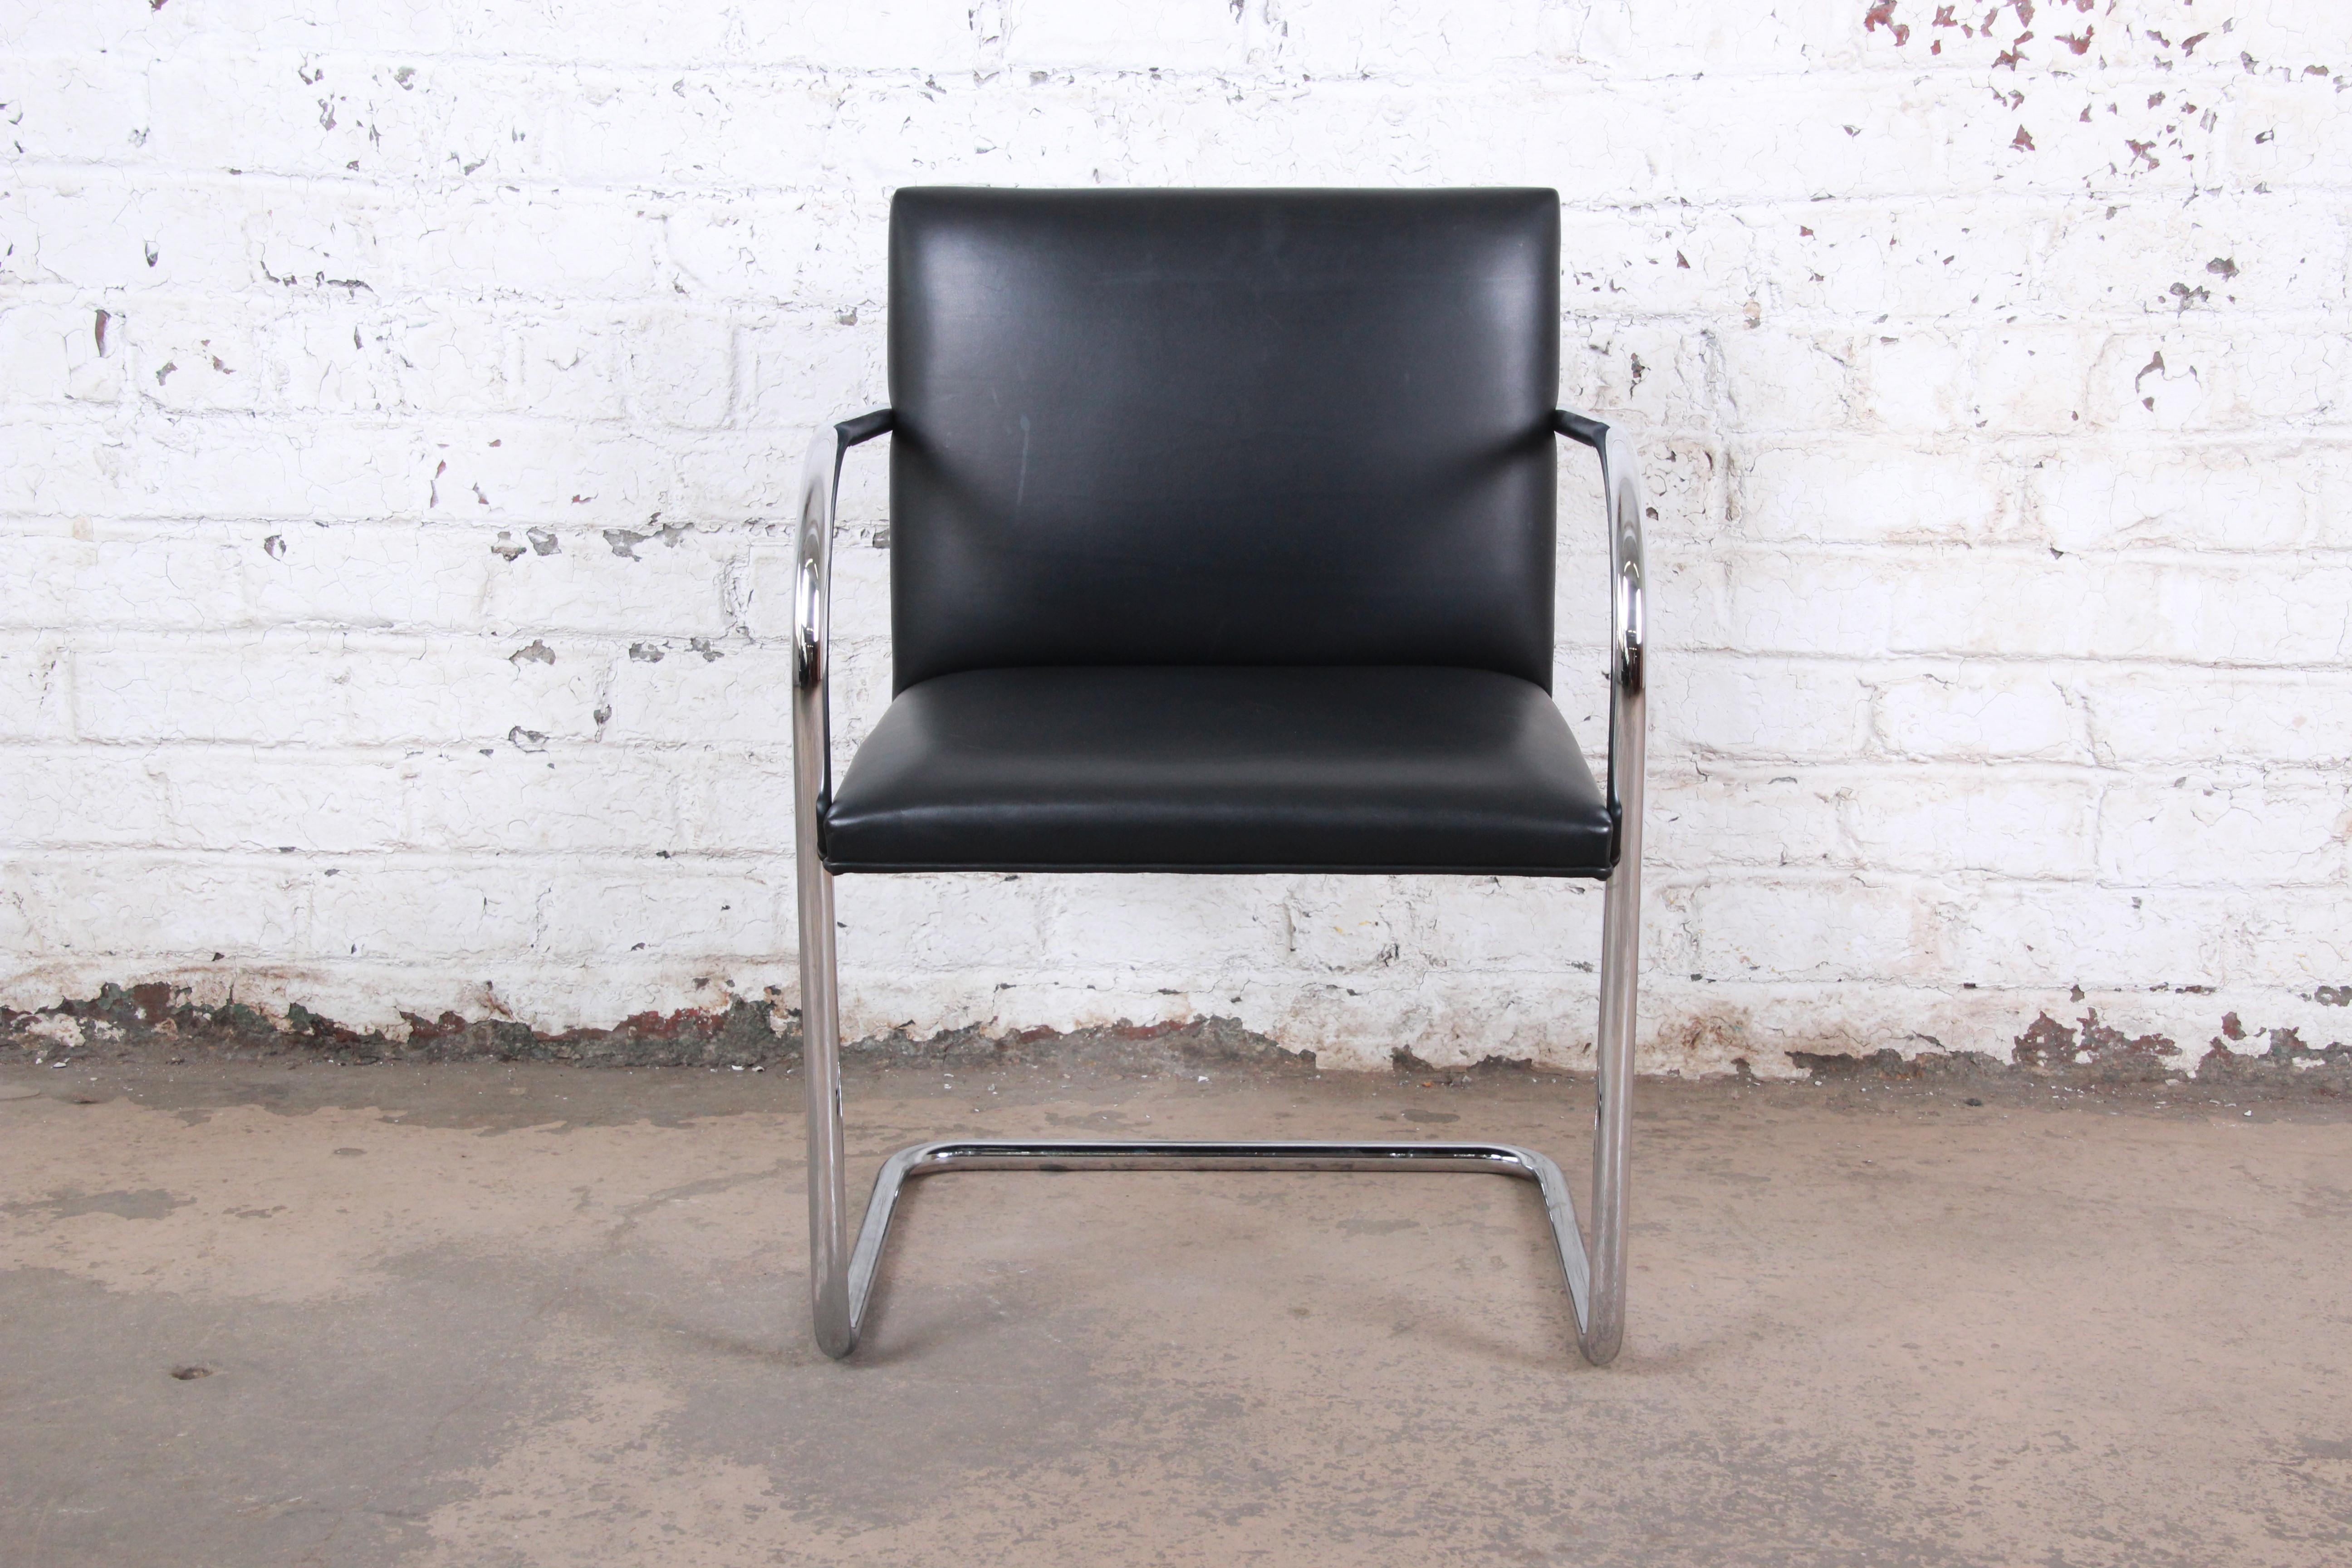 An exceptional Brno tubular chair in black leather. Designed by Ludwig Mies van der Rohe in 1930 for the Tugendhat House. Chrome-plated steel frame. The chair is signed and in very good original vintage condition.

Price is per chair. We currently